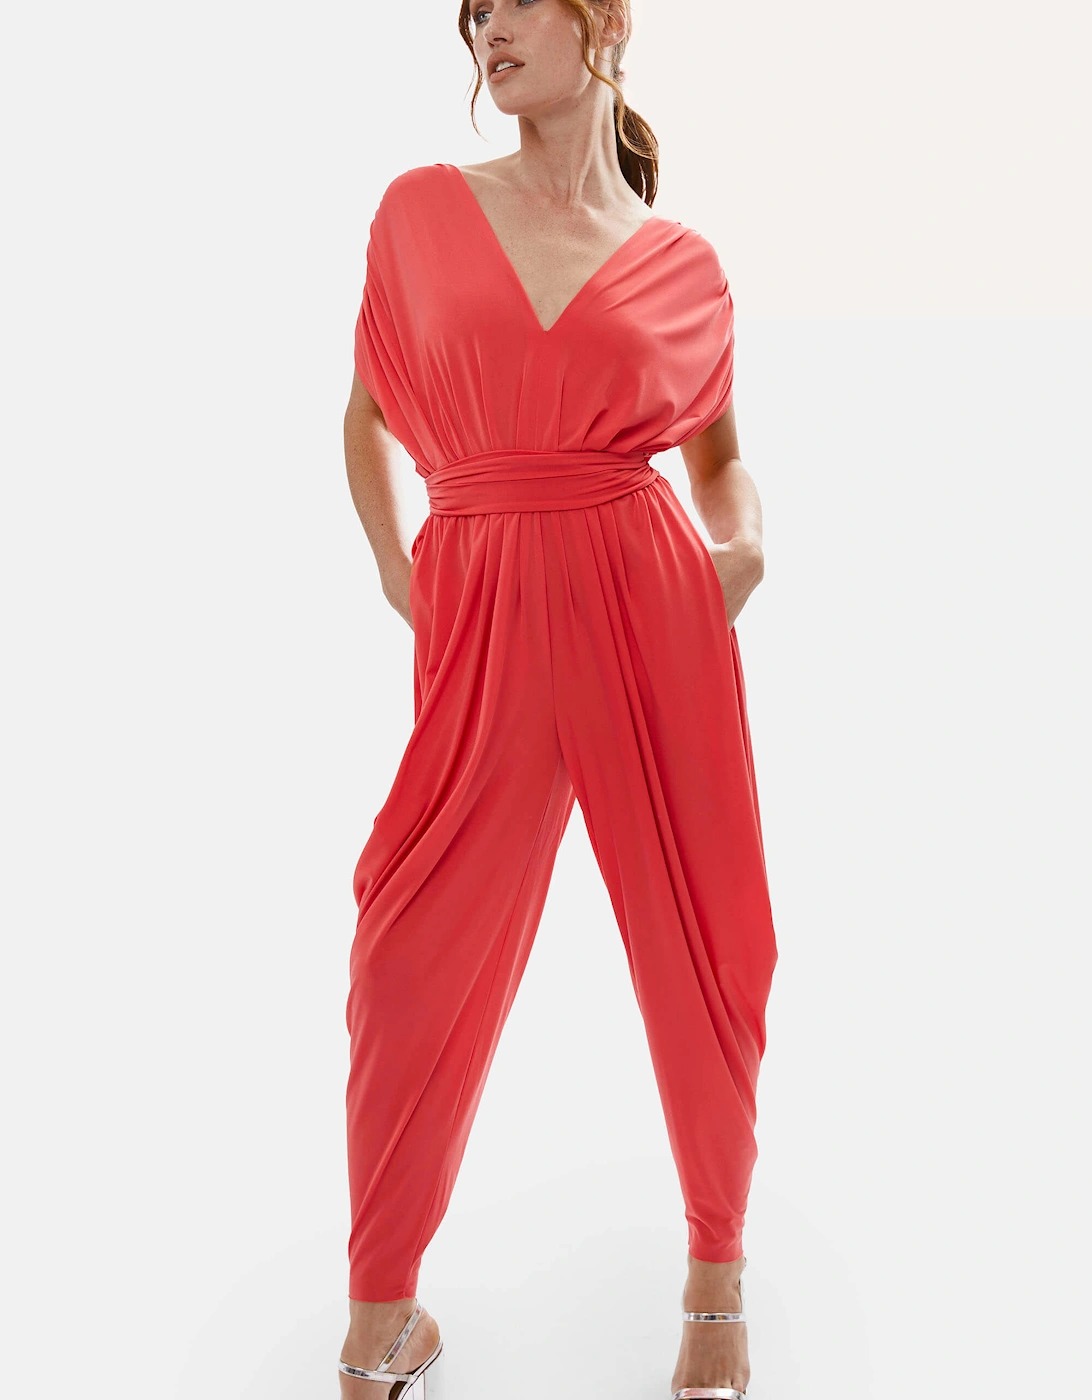 James Lakeland Women's Ruched Jumpsuit Red - Size: 12